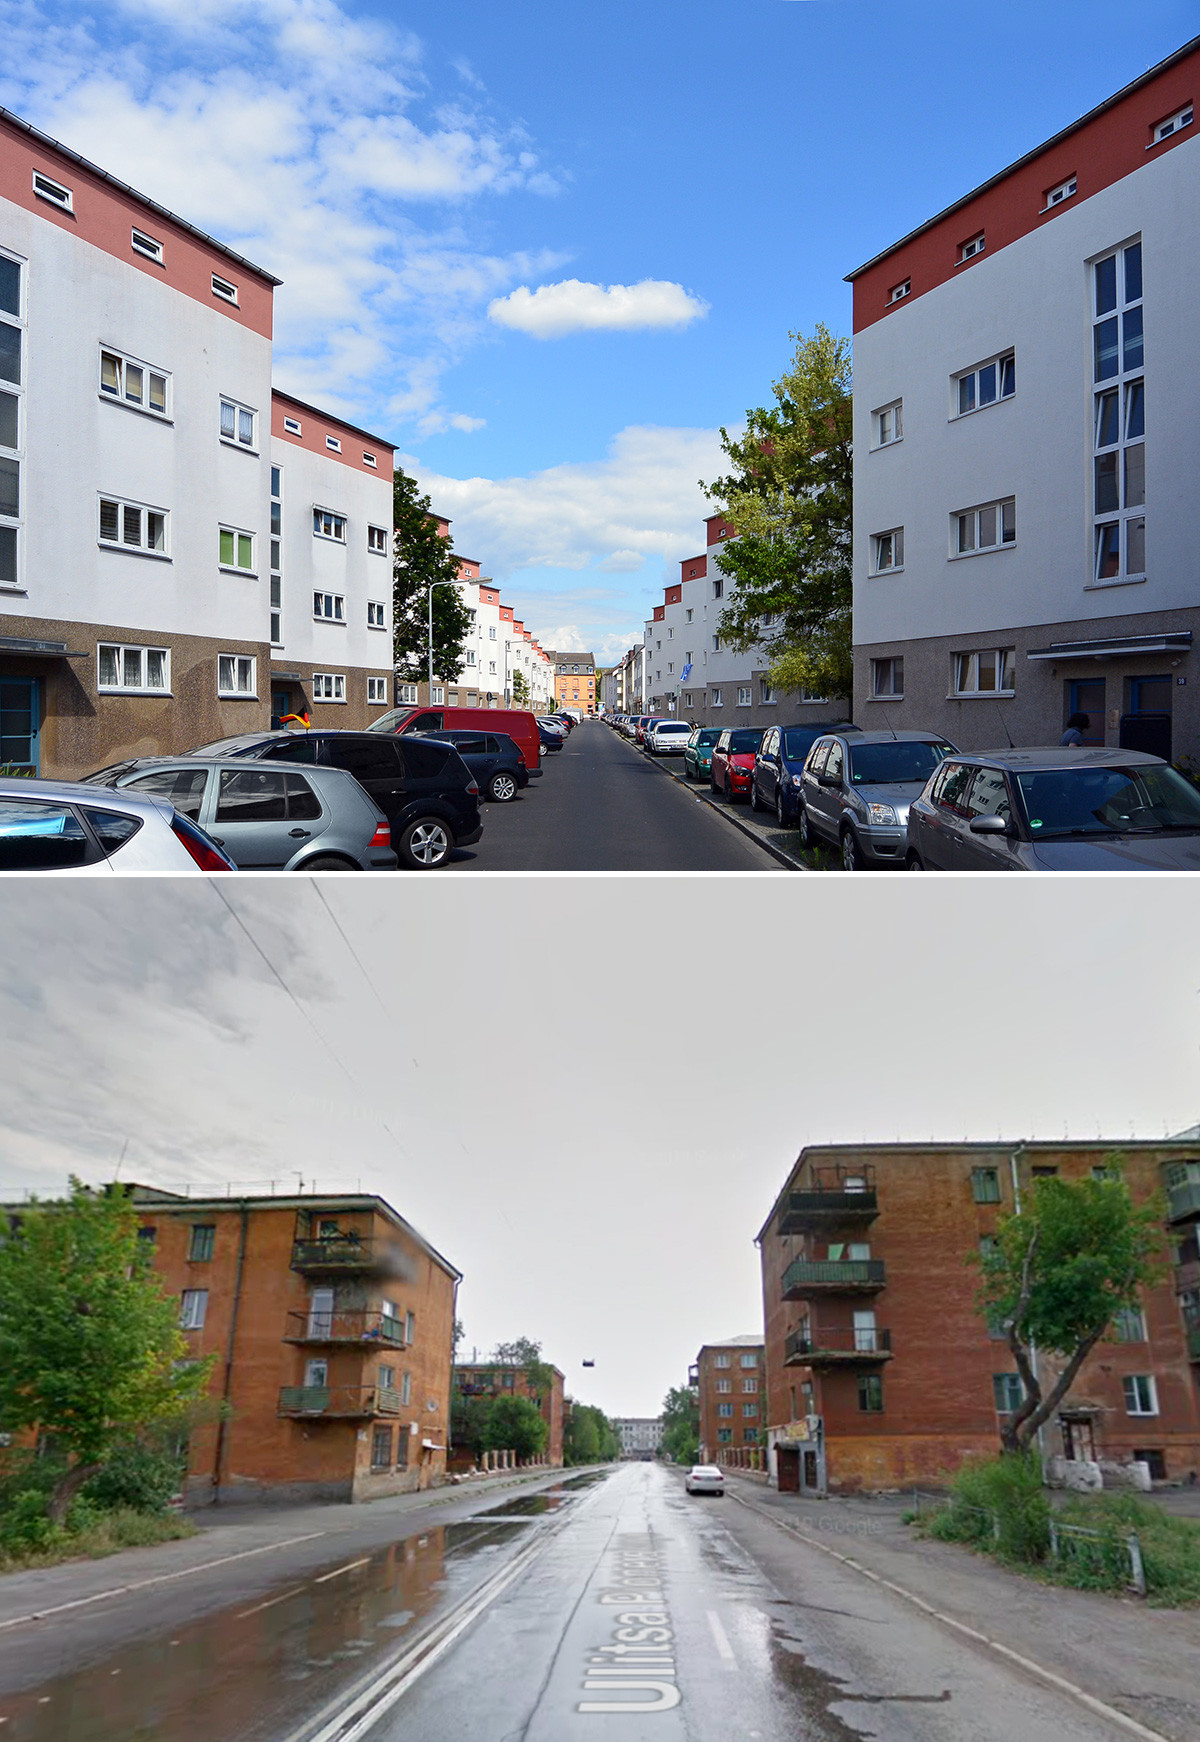 Above: 'Zig-Zag Houses' in Frankfurt designed by May. Below: Sotsgorod in Magnitogorsk.